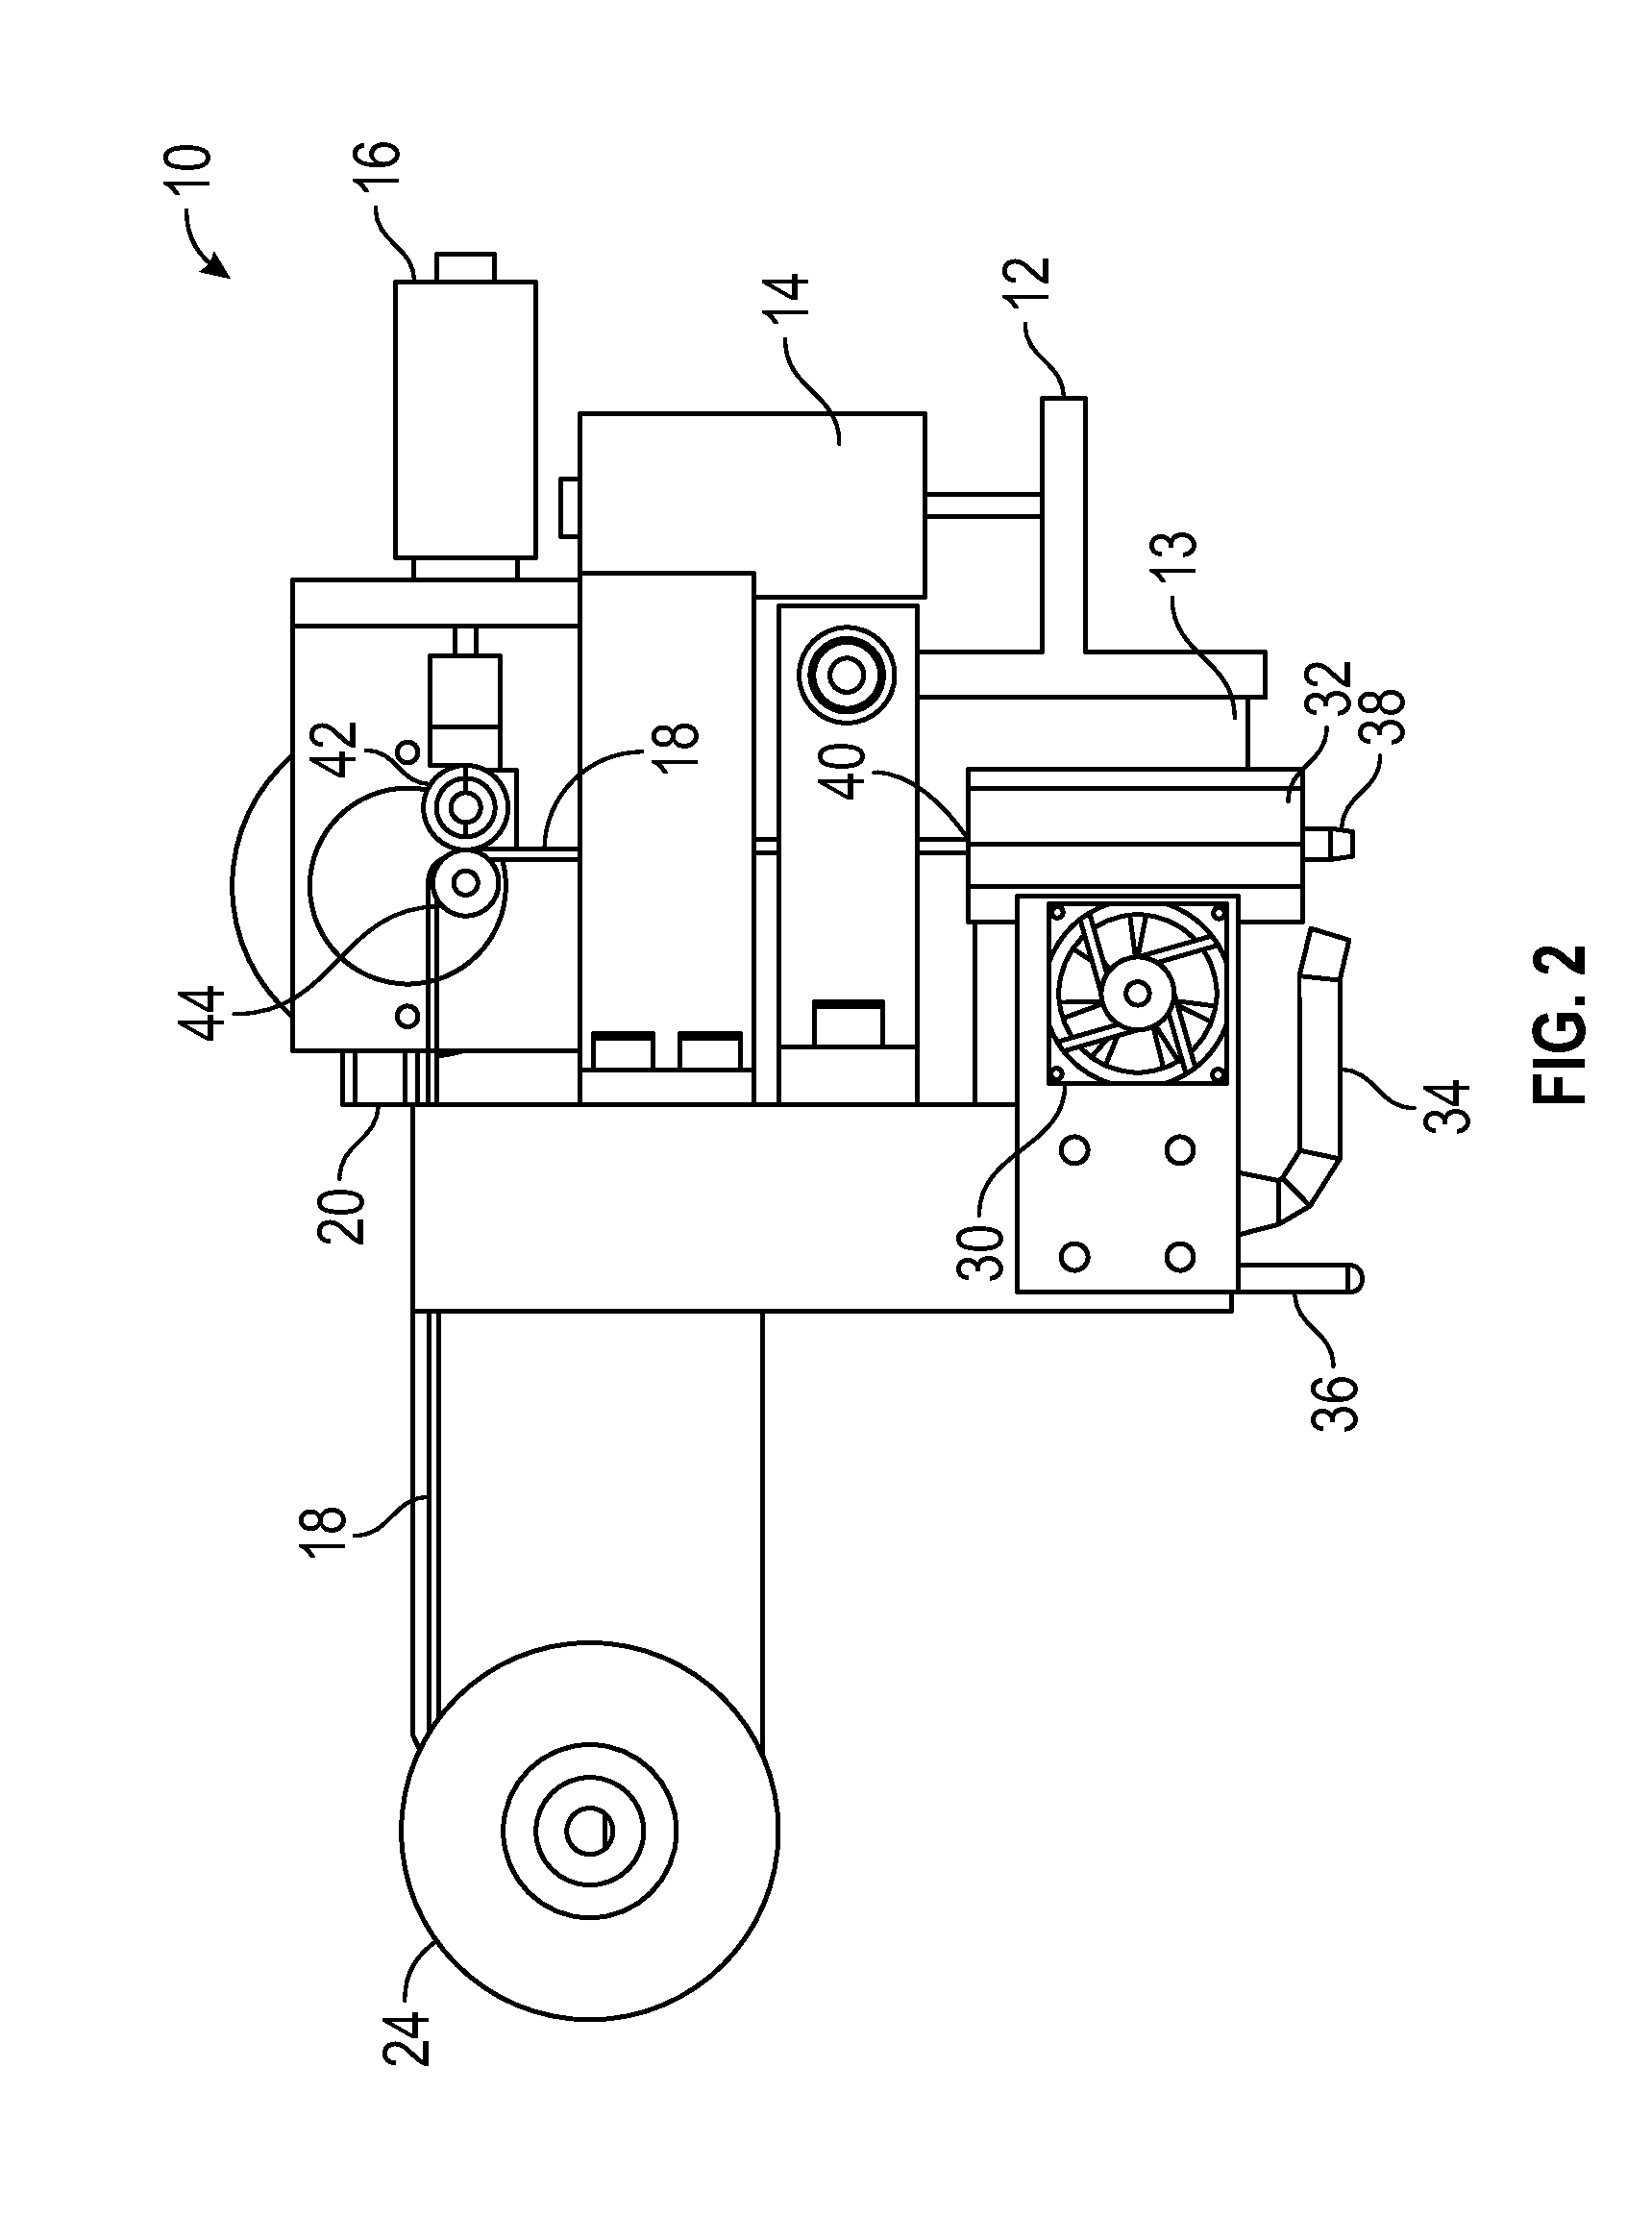 Method and apparatus for wire handling and embedding on and within 3D printed parts